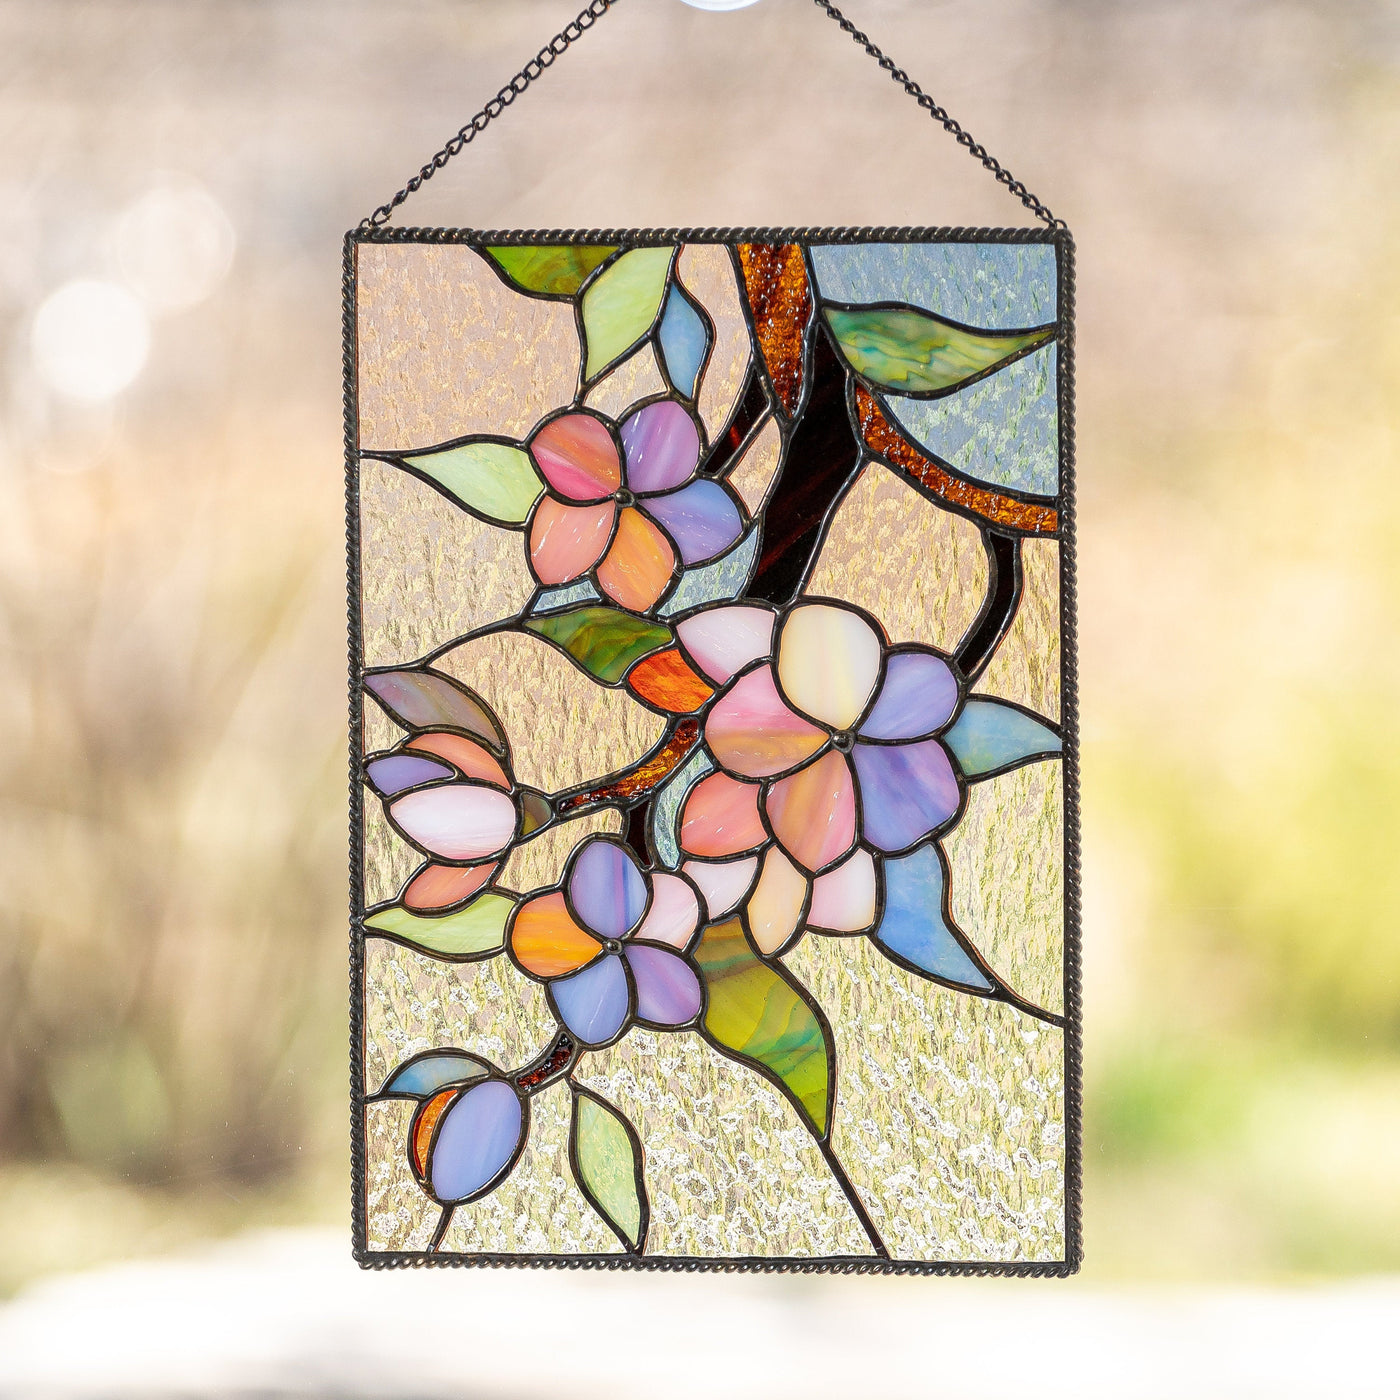 Cherry blossom stained glass window panel Anniversary gift for wife Sakura flower stained glass art